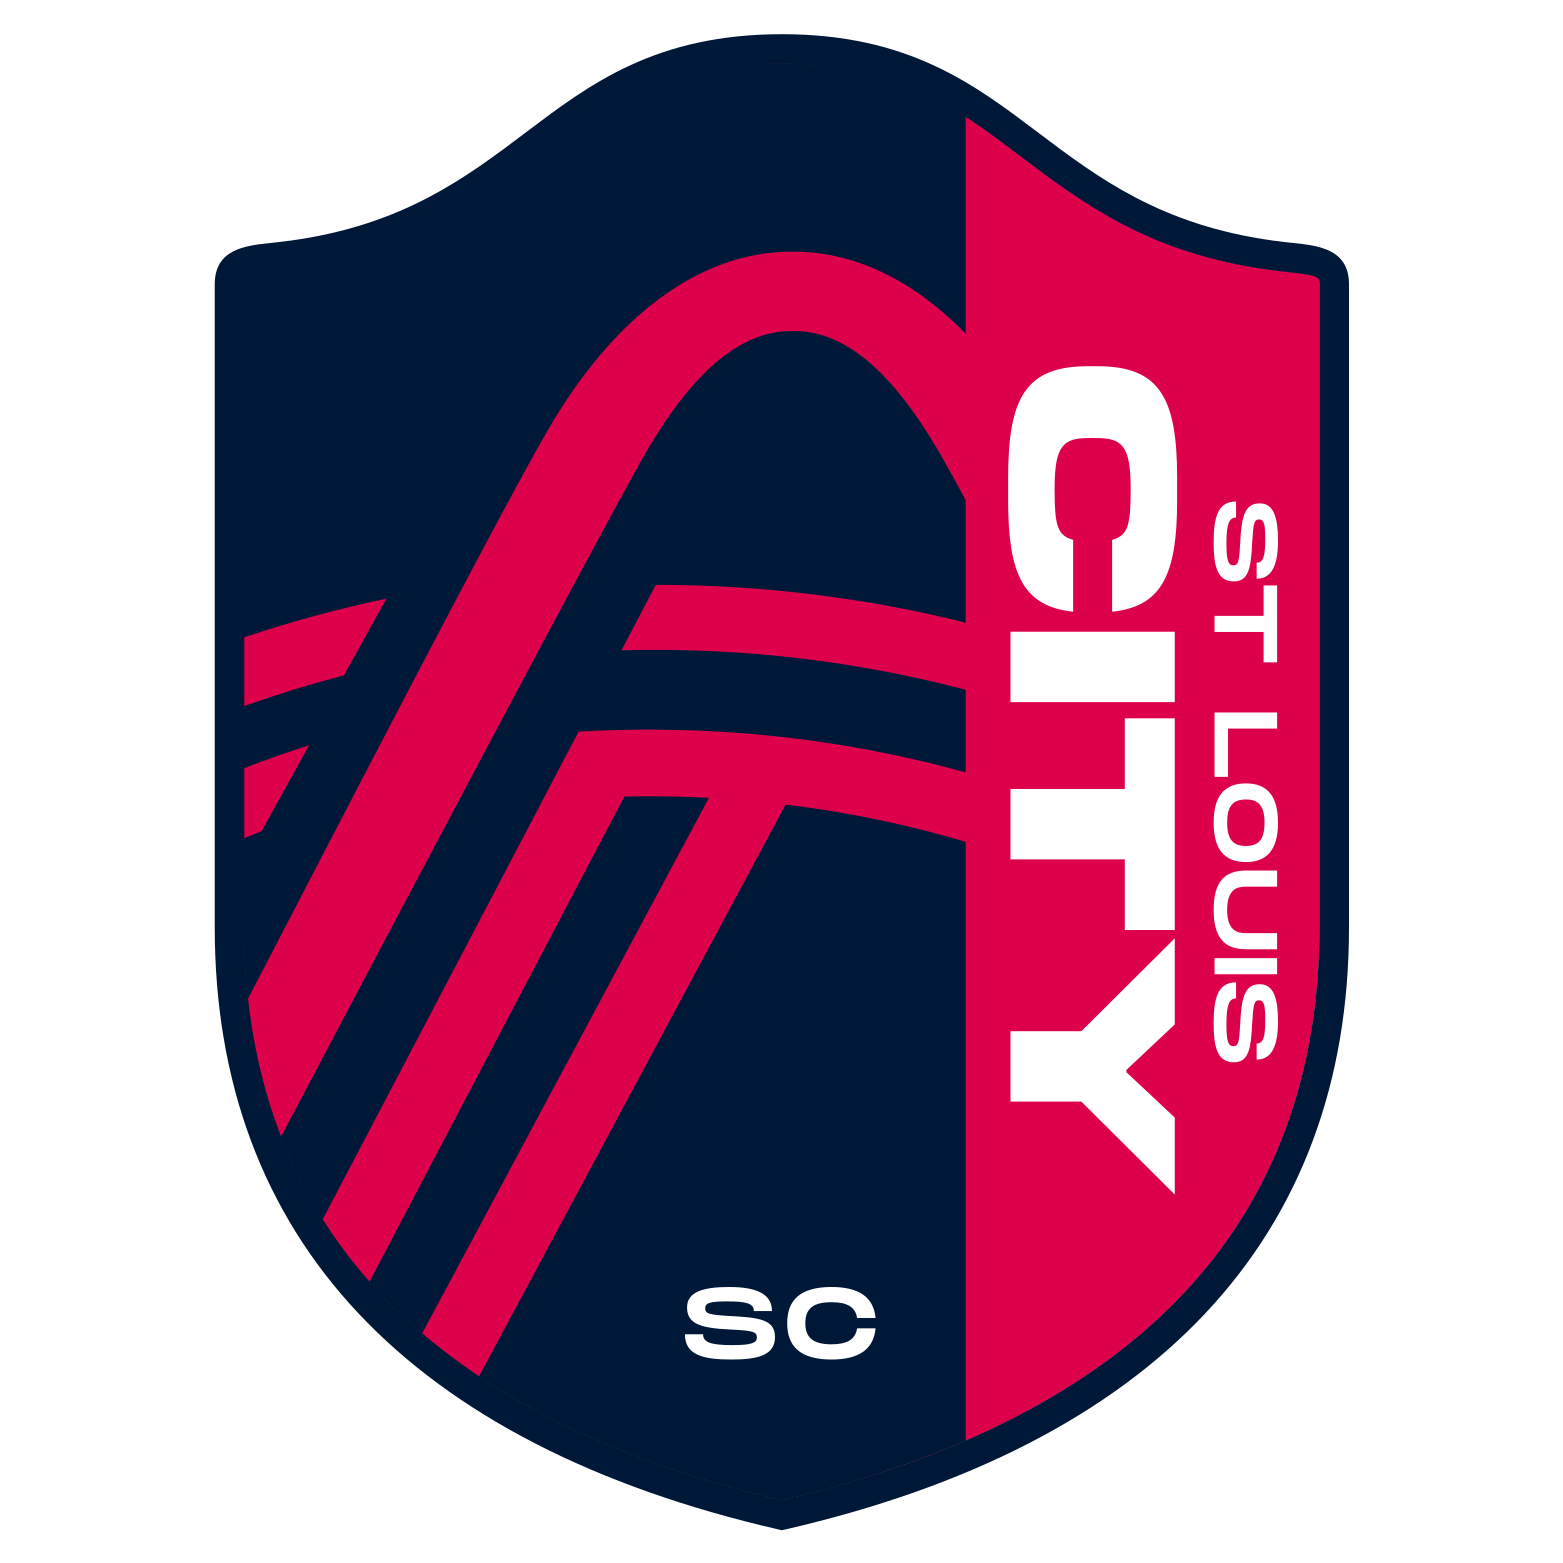 St. Louis City vs Los Angeles FC Prediction: Inconsistency is still an issue with these two clubs